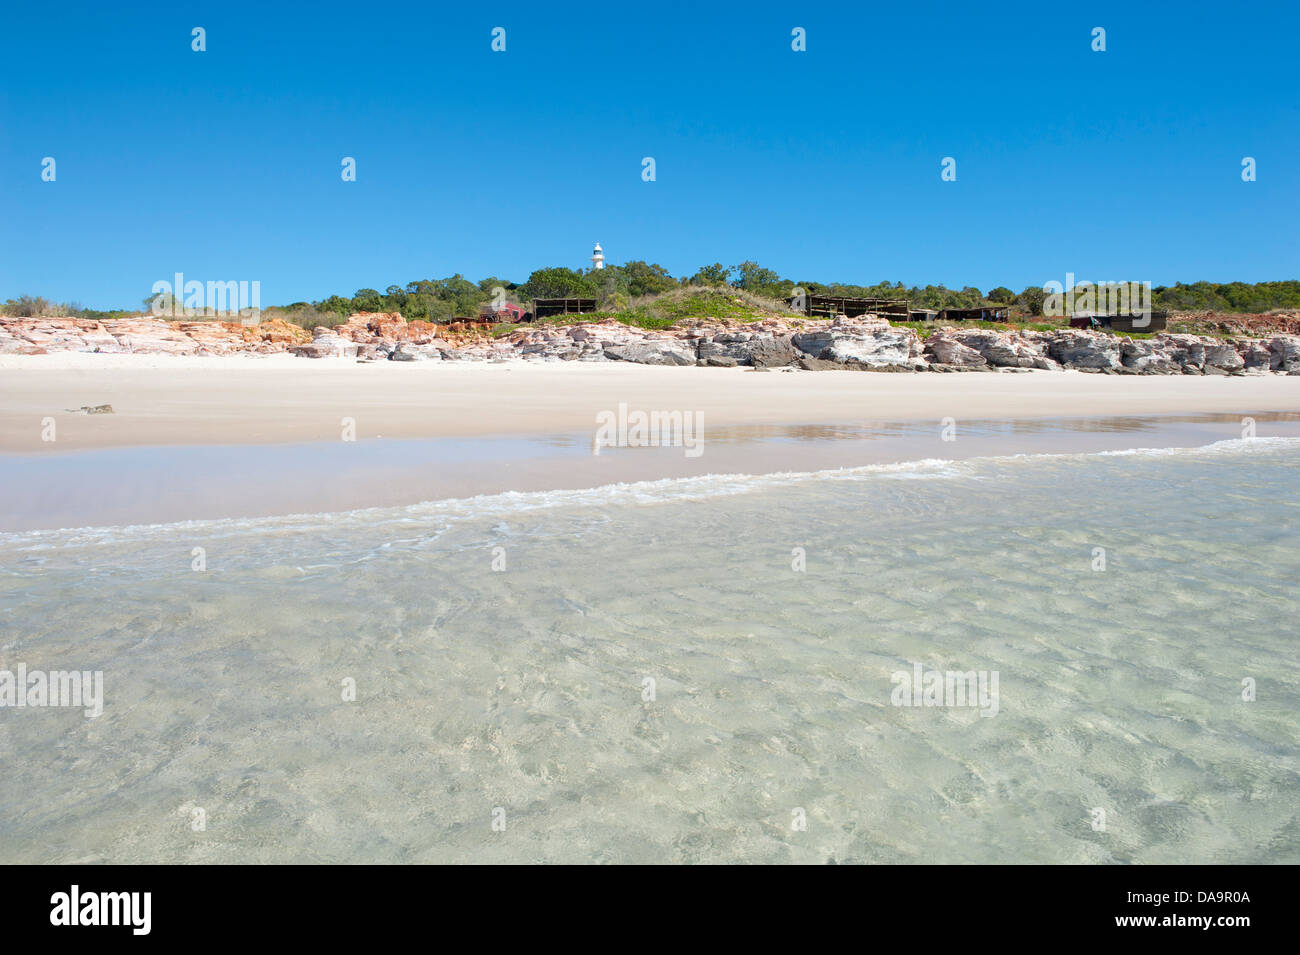 The lighthouse in view, the sandy eastern beach is the swimming beach at Cape Leveque, Dampier Peninsula, Kimberley, Australia Stock Photo